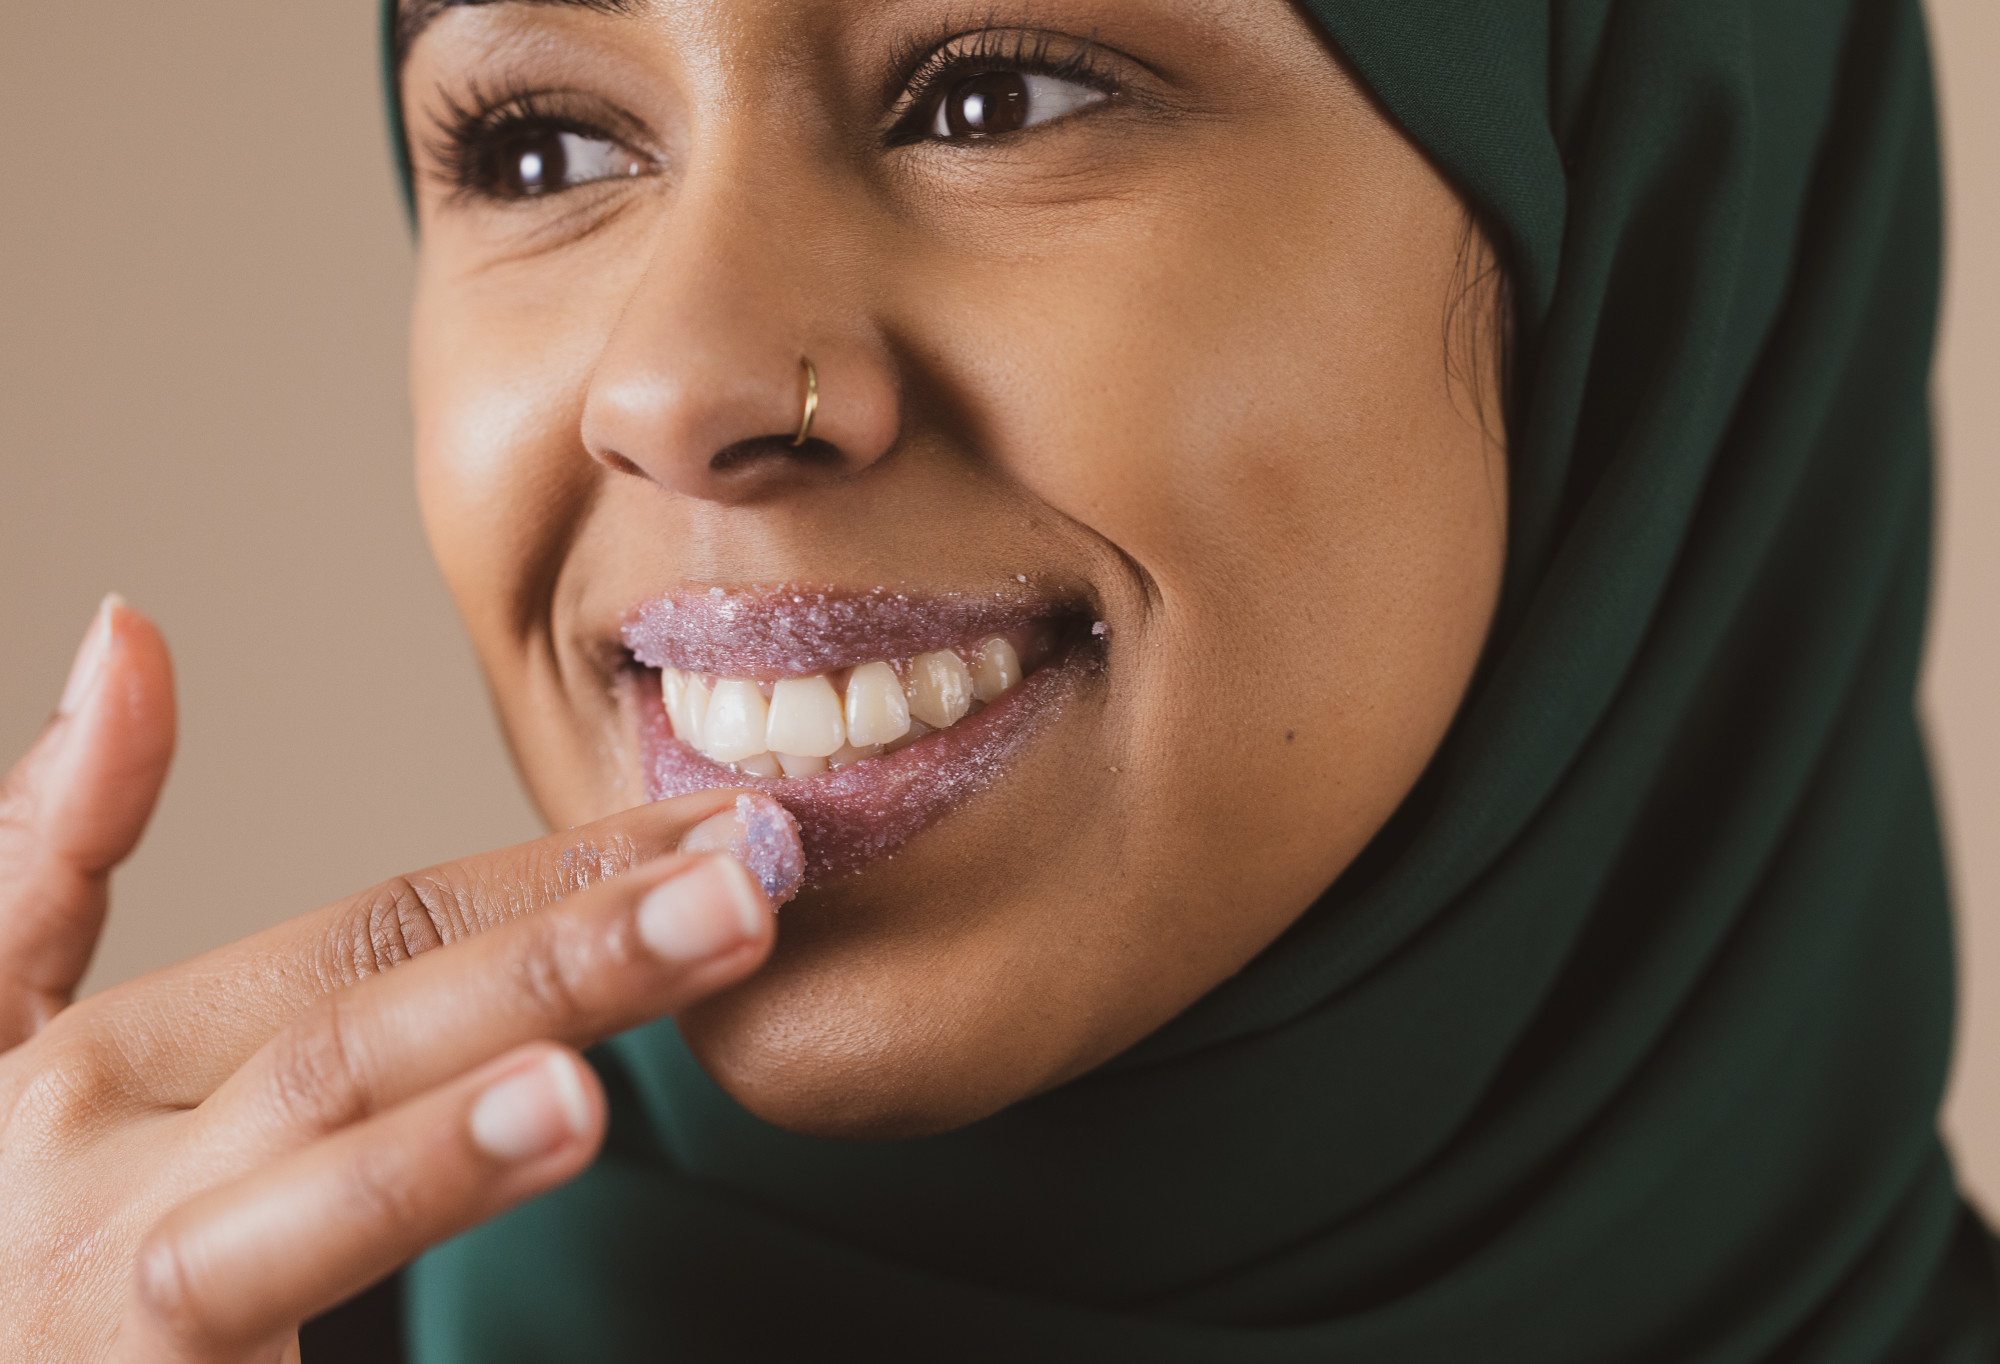  A person with a nose piercing, wearing a Hijab, beams as they scrub their lilac, Unicorn sugar lip scrub coated lips.